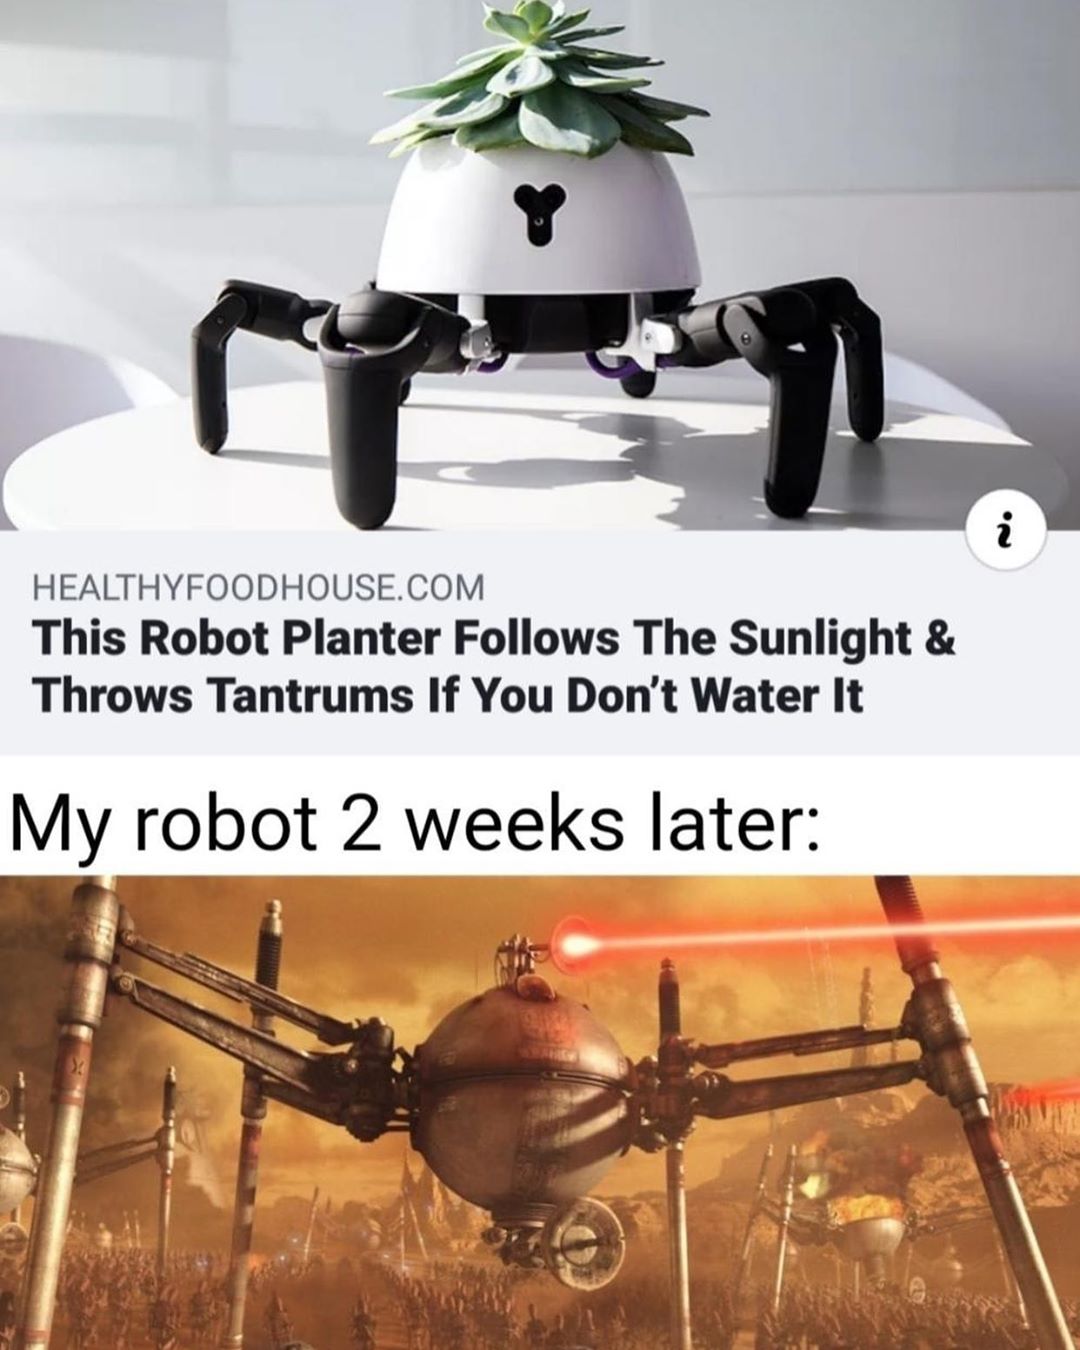 star wars spider droid - Healthyfoodhouse.Com This Robot Planter s The Sunlight & Throws Tantrums If You Don't Water It My robot 2 weeks later